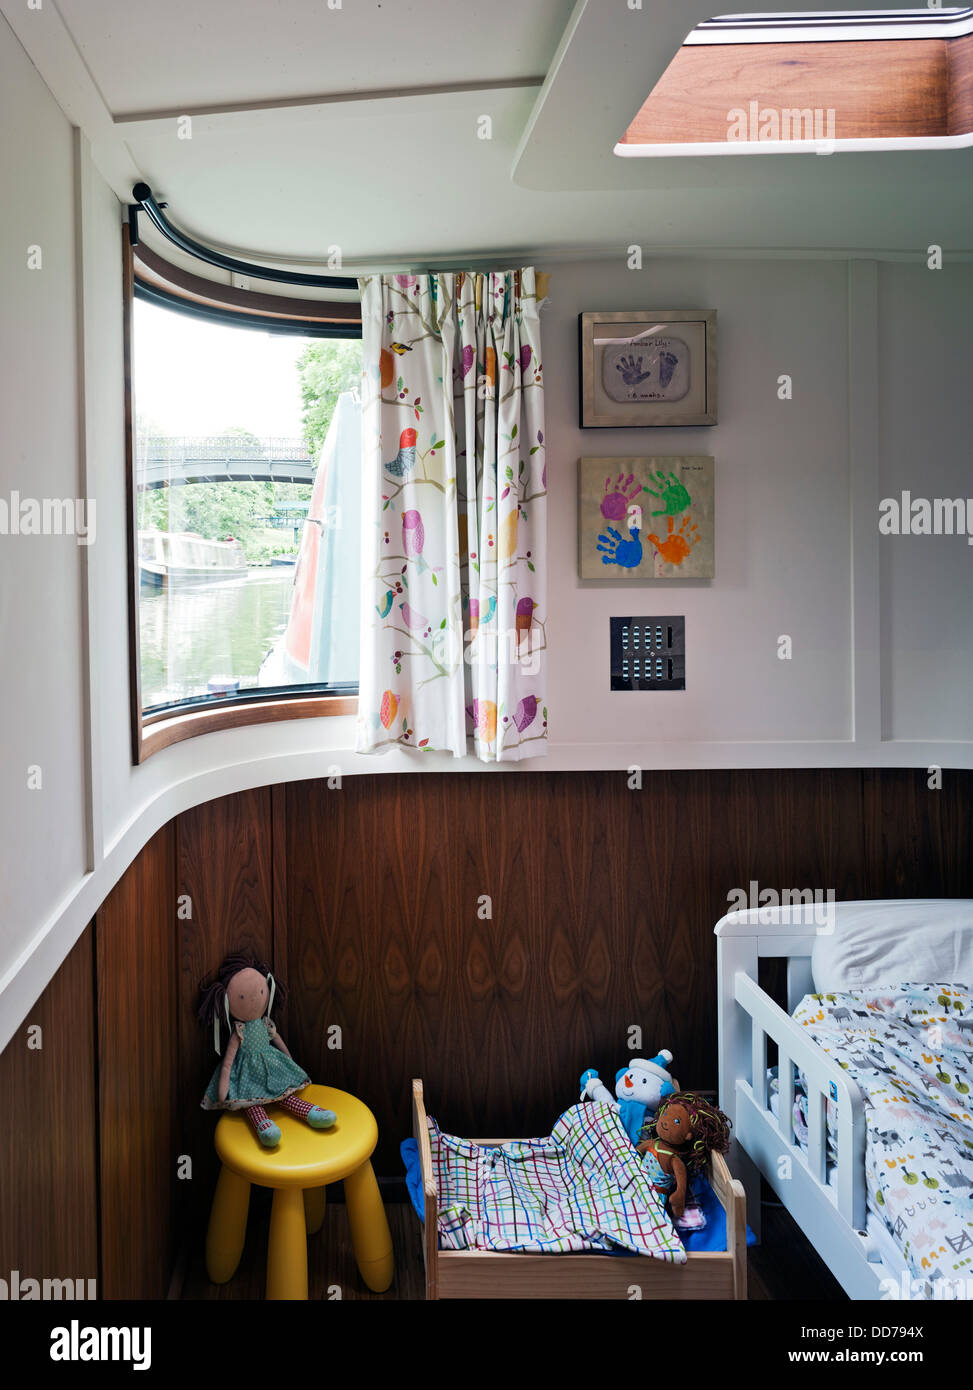 Narrowboat, London, United Kingdom. Architect: Pete Young, 2013. Daughter's bedroom with curved window. Stock Photo